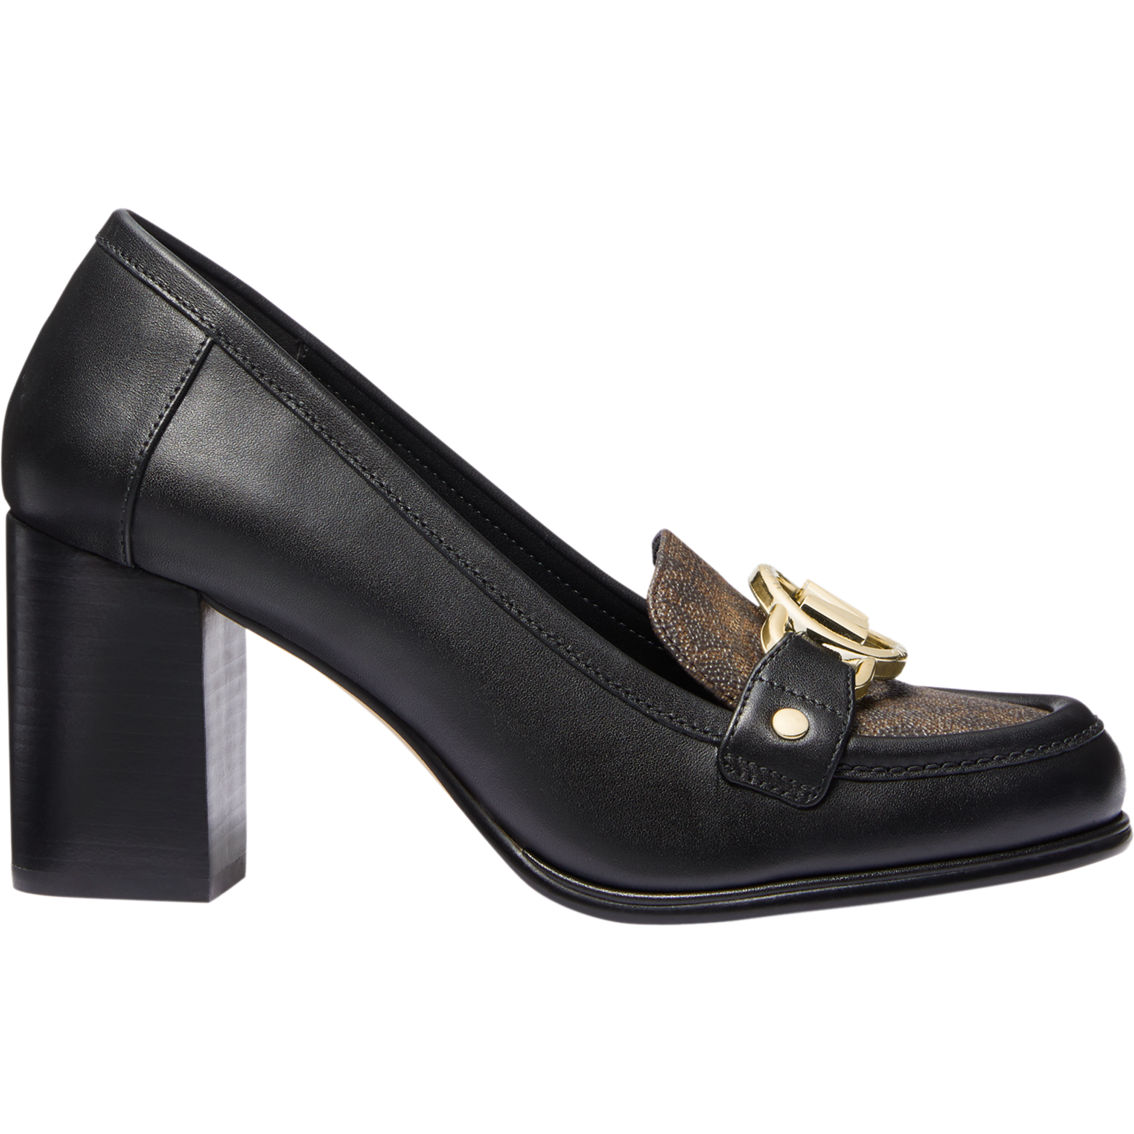 Michael Kors Rory Heeled Loafers - Image 2 of 3